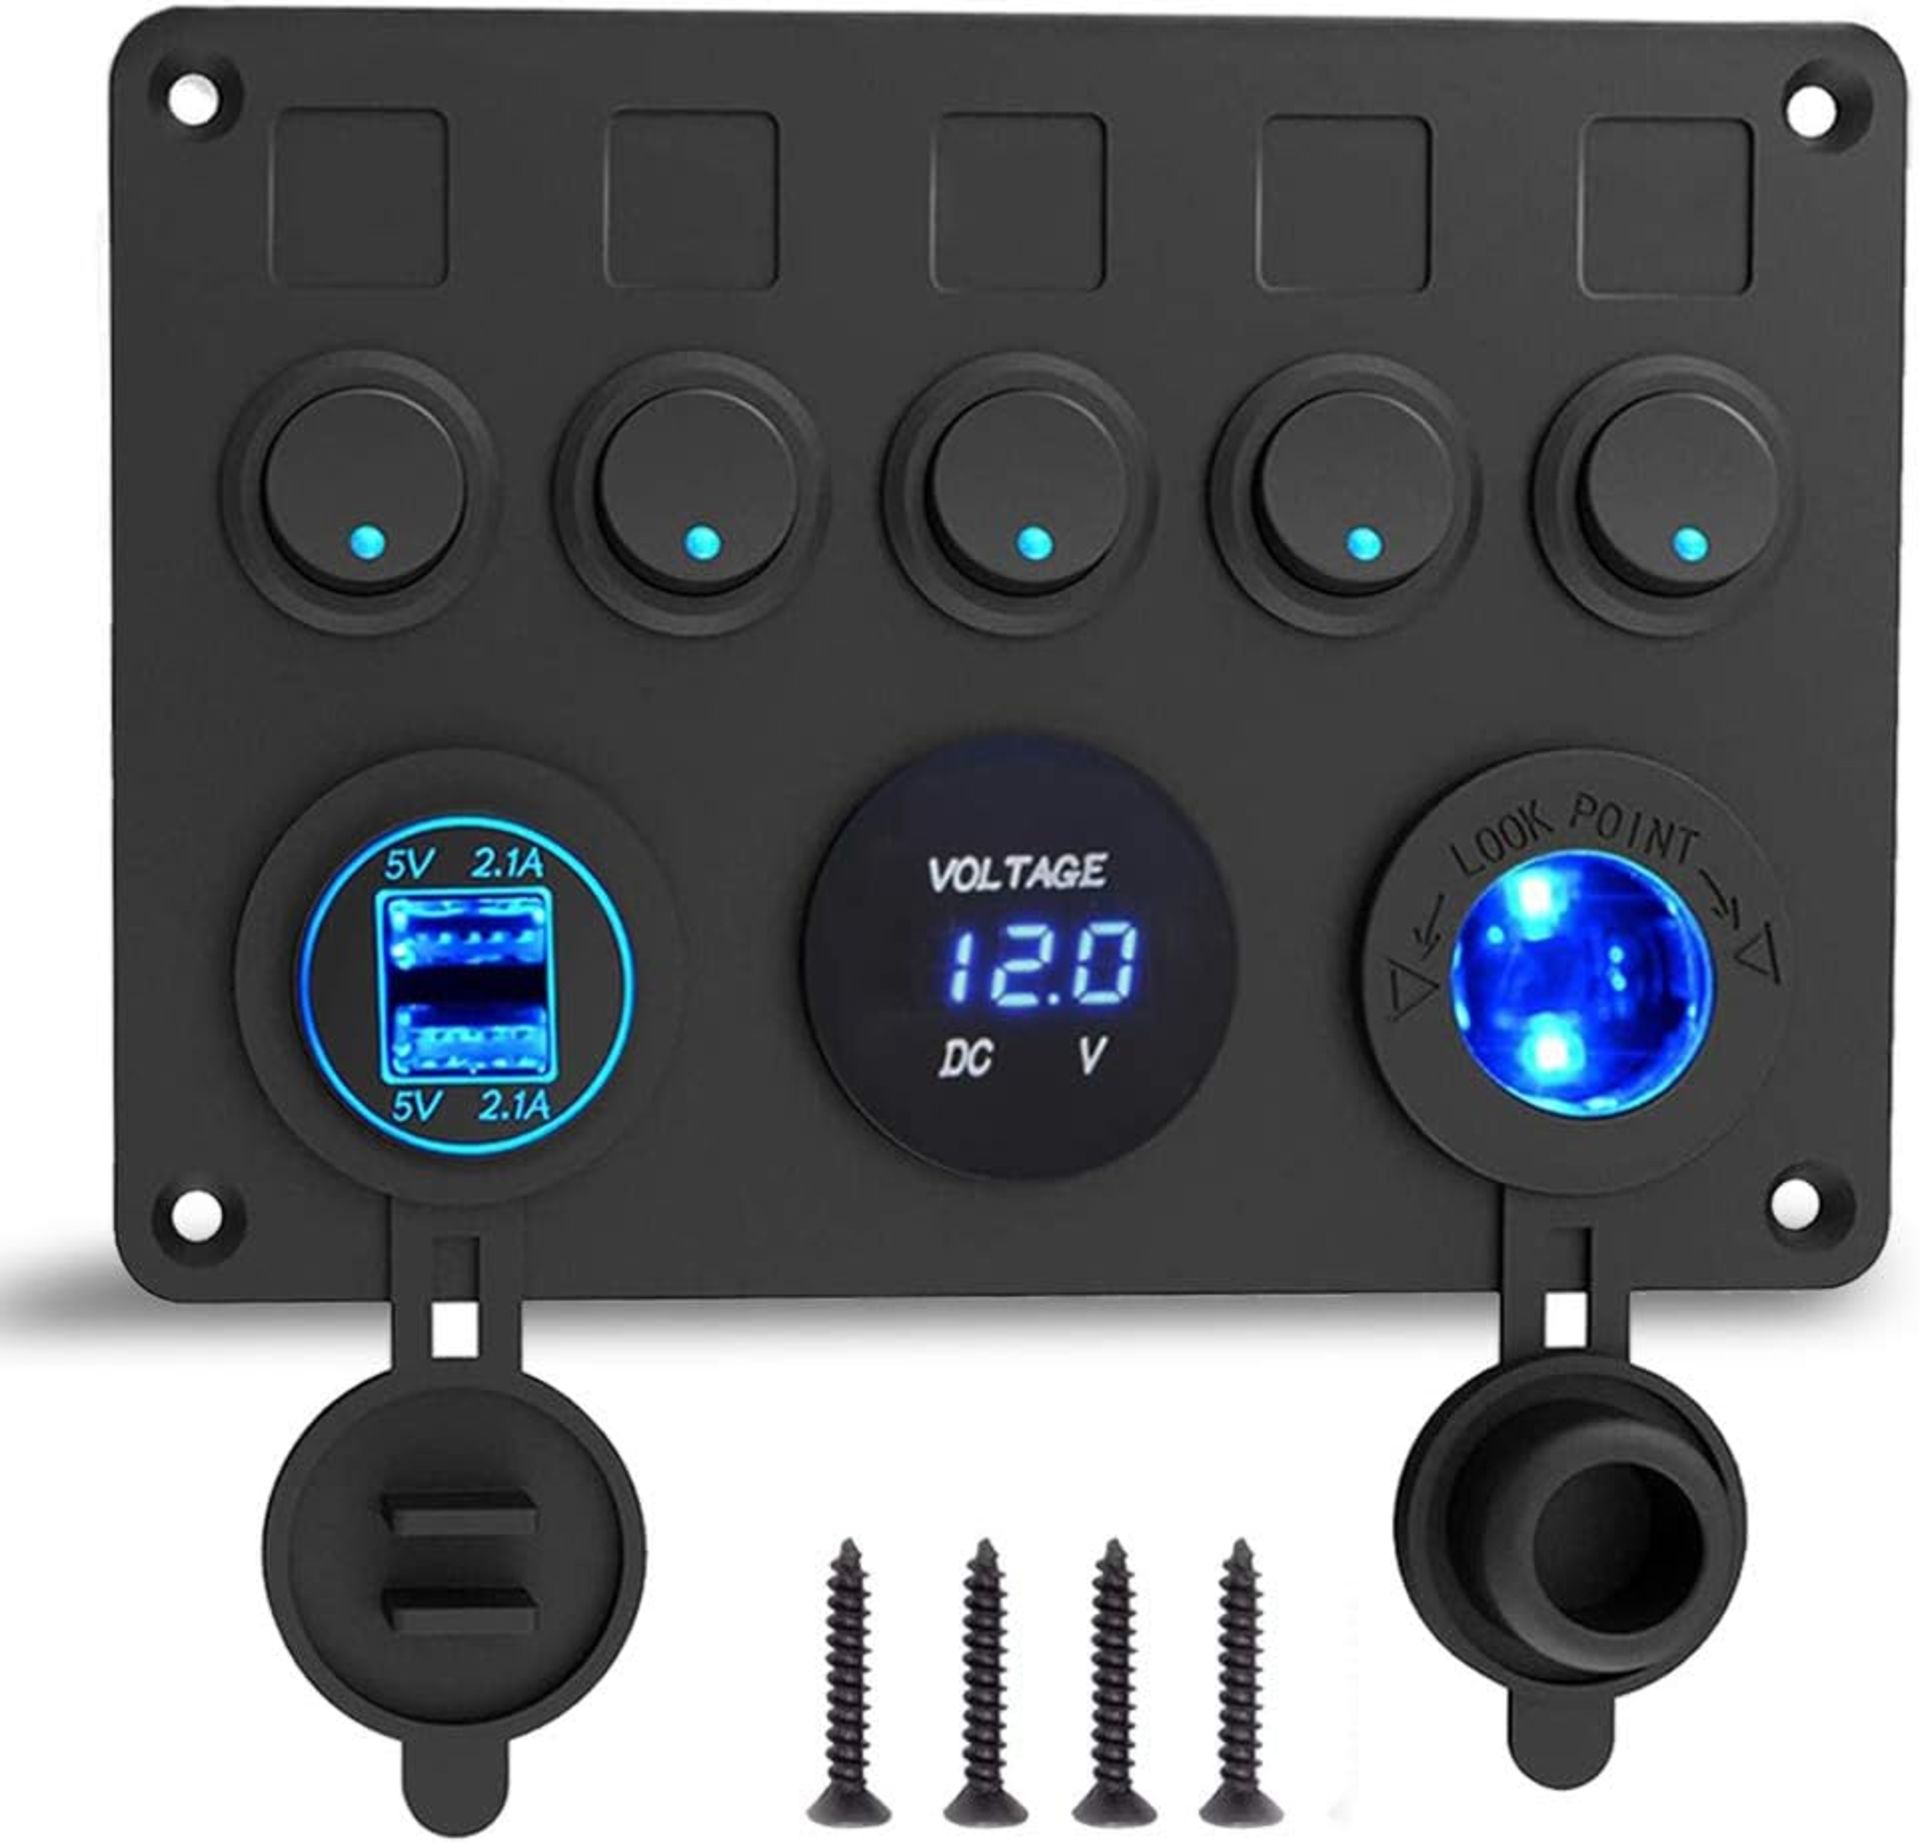 RRP £44 Set of 2 x IP65 Waterproof 12V/24V Toggle Switch Panel, Dual USB Charger Port 4.2A + Lighter